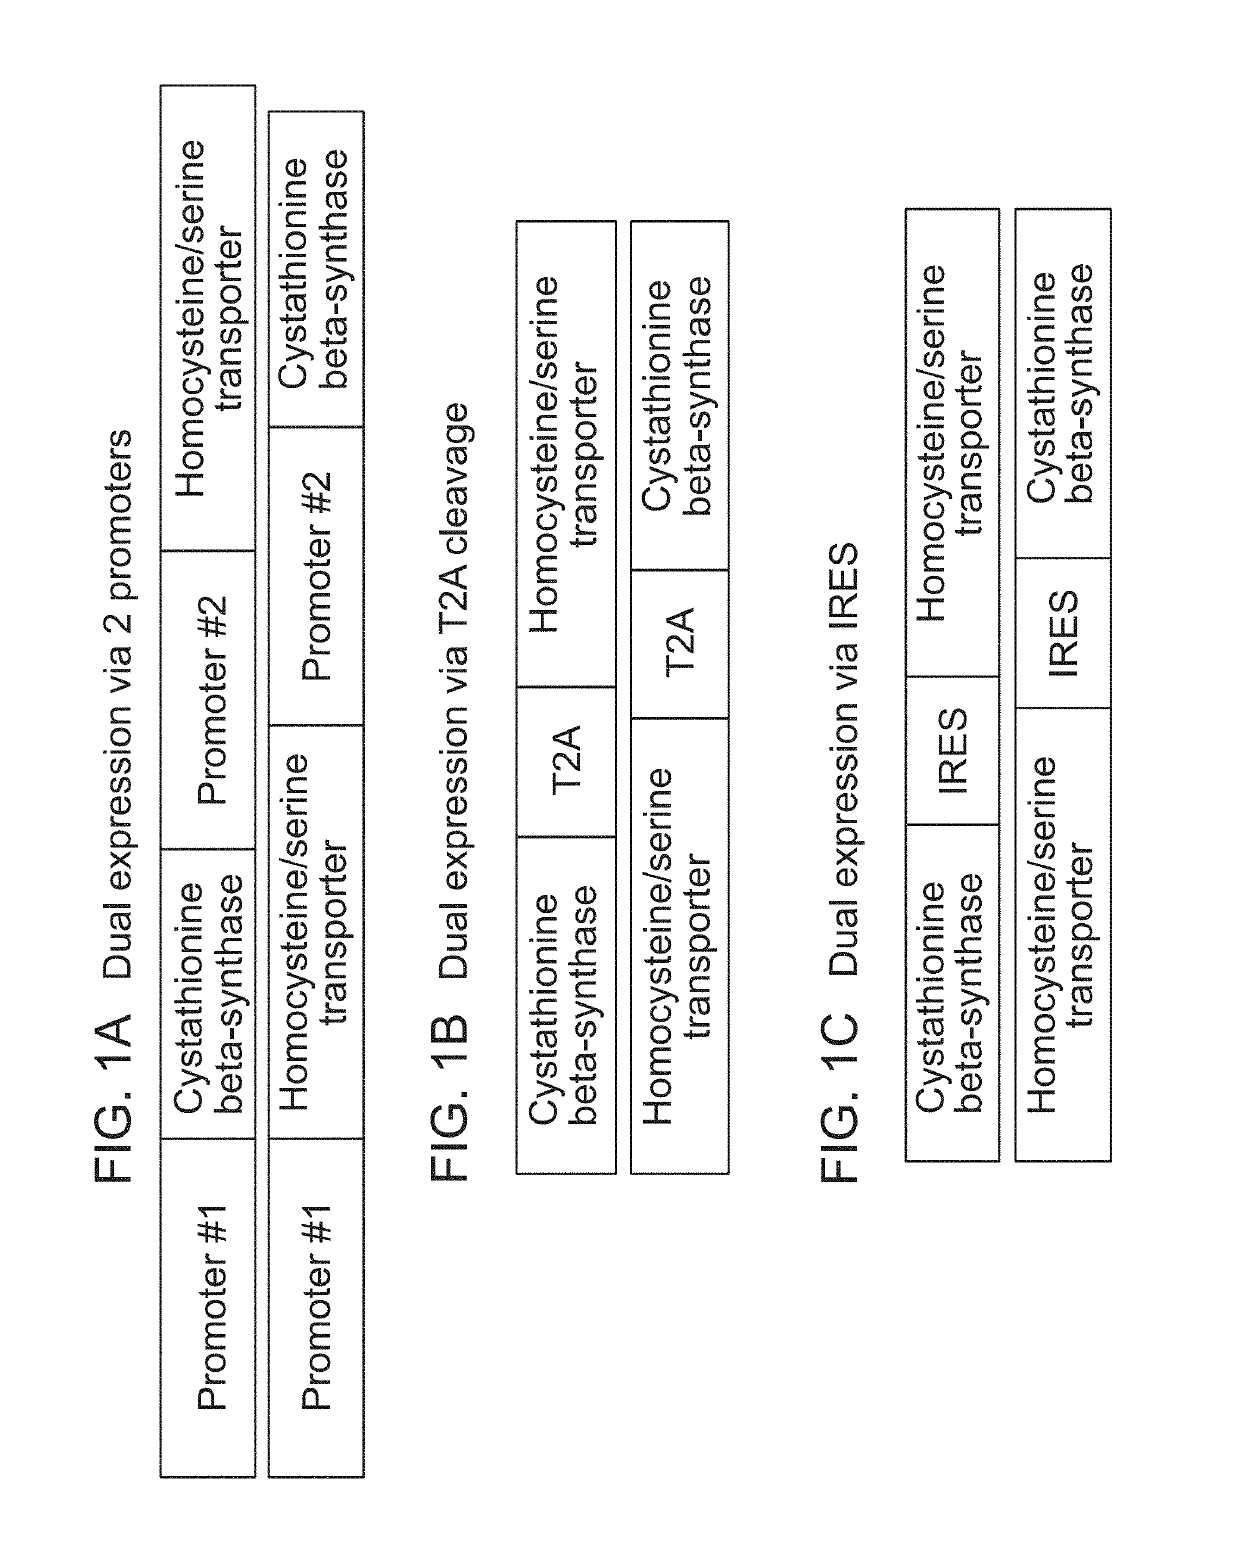 Therapeutic cell systems and methods for treating homocystinuria